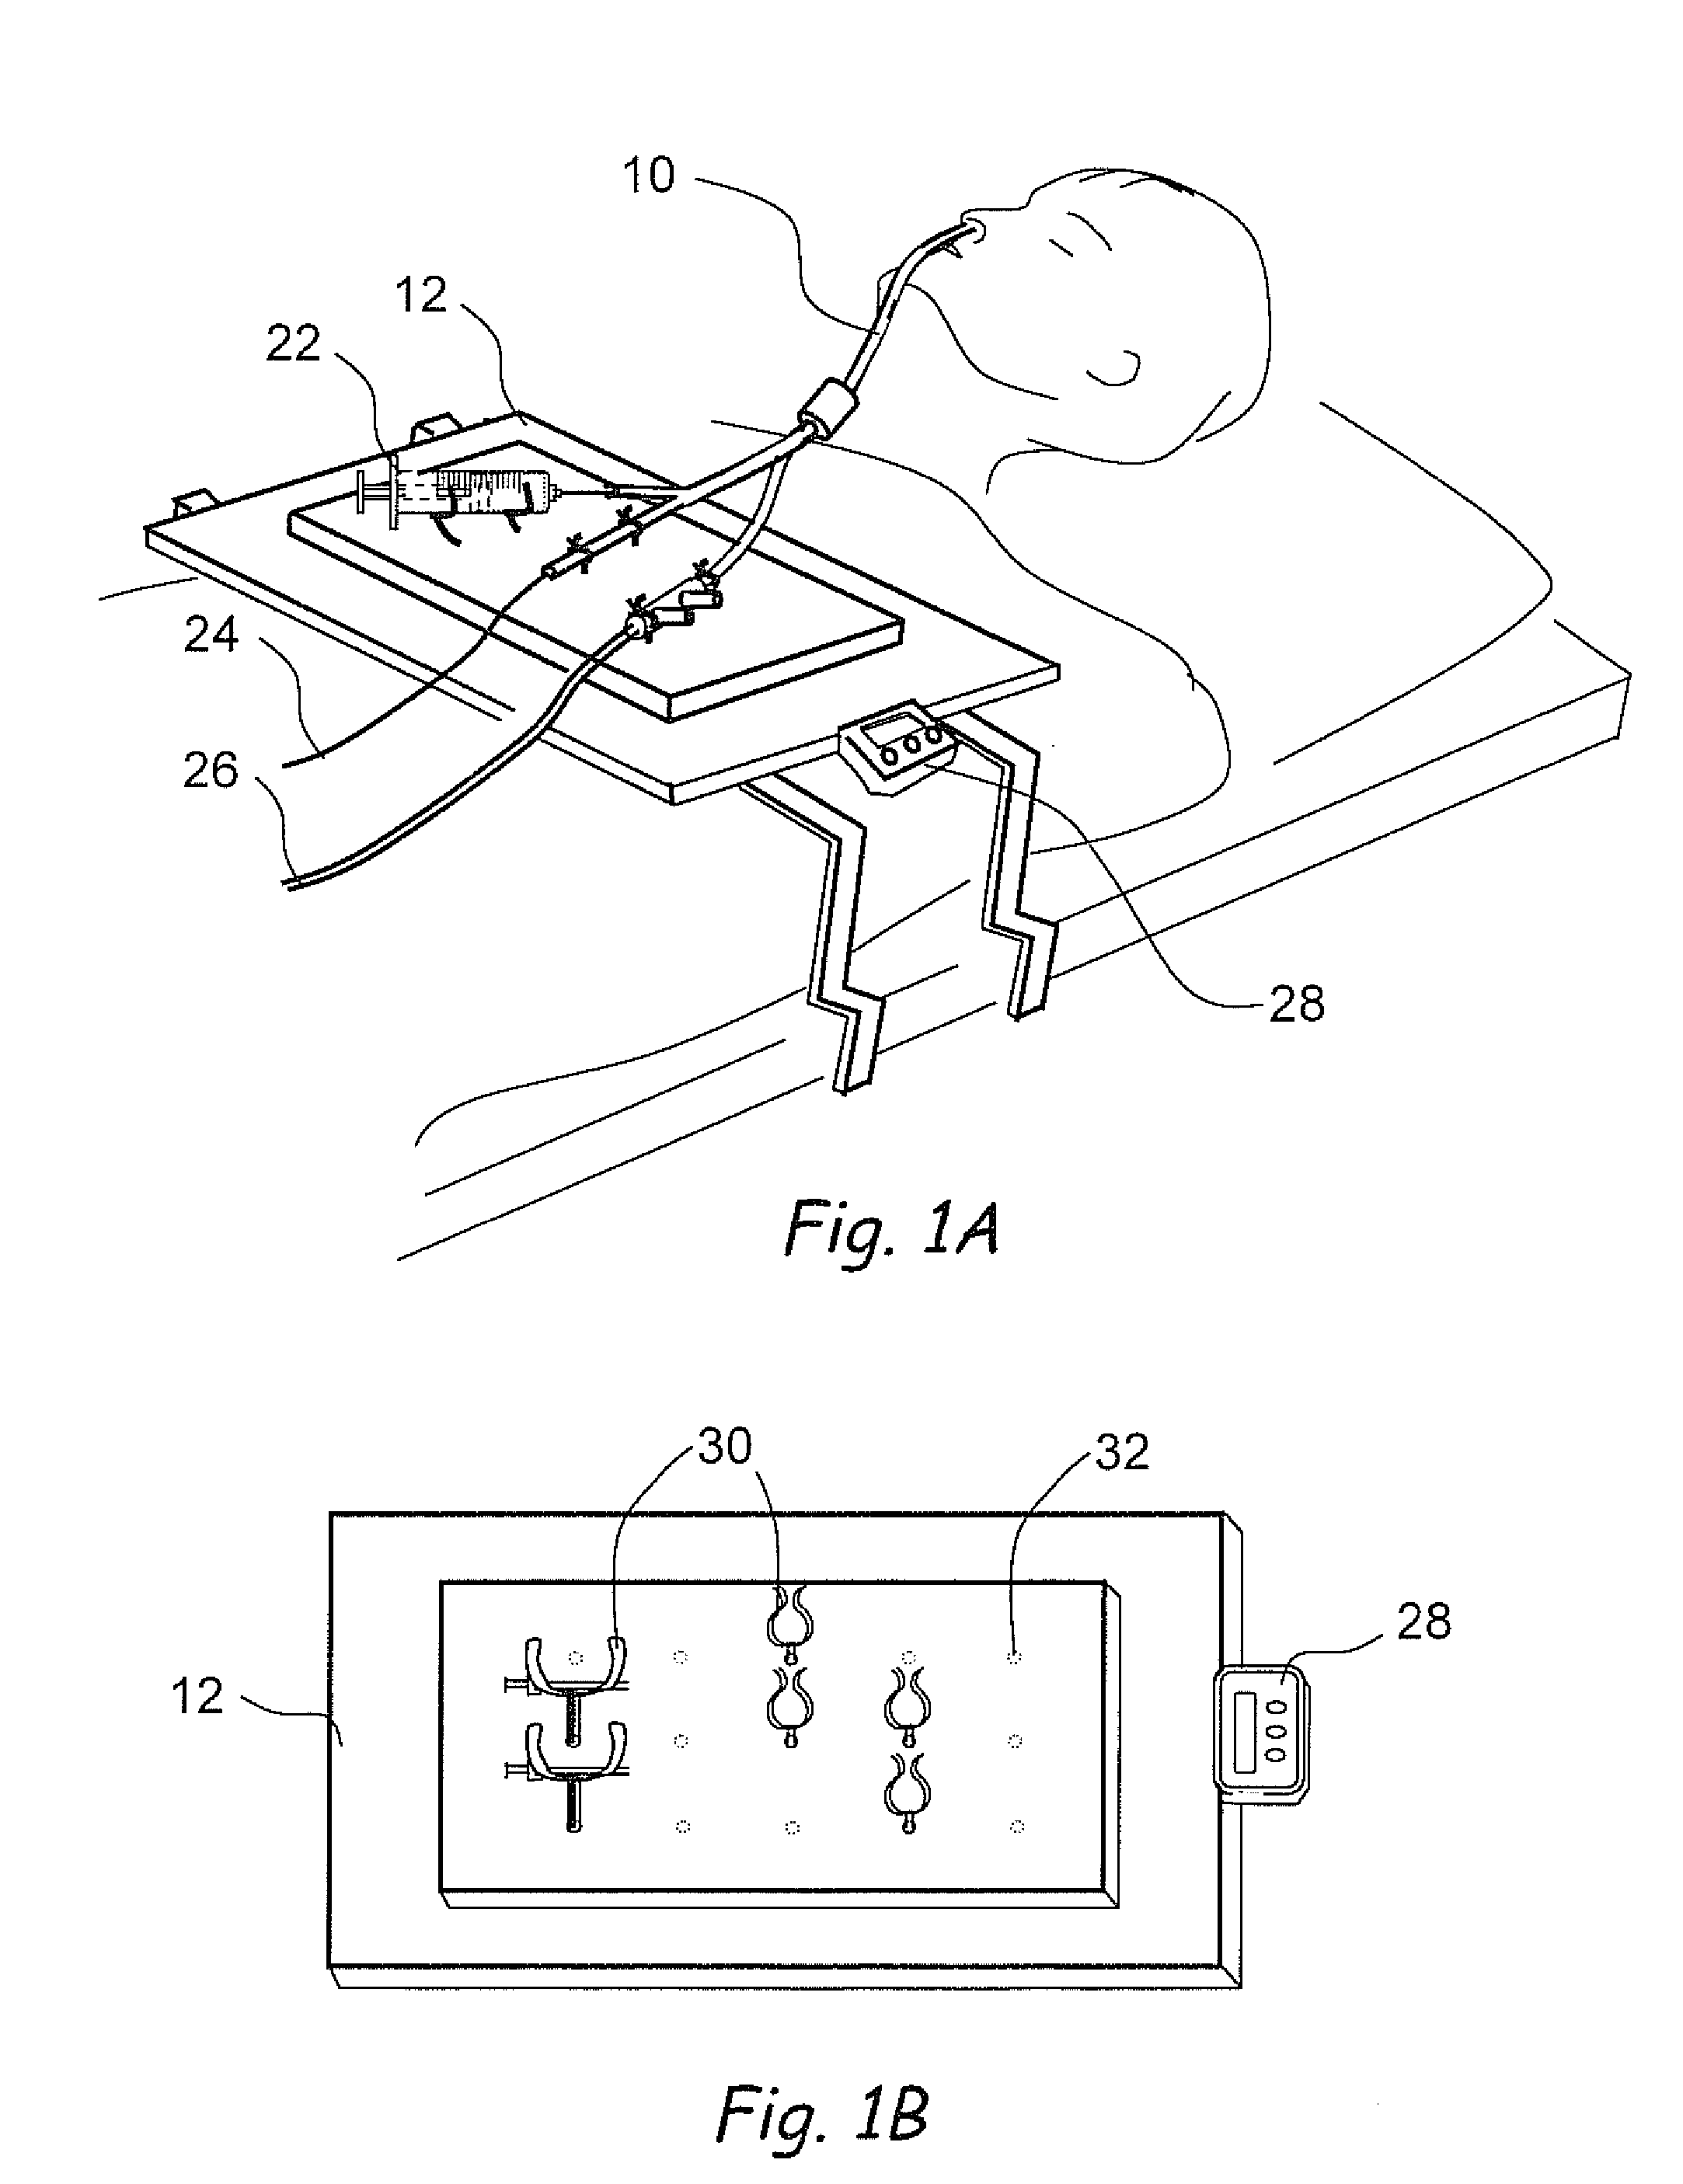 Devices, Systems and Methods for Treating Disorders of the Ear, Nose and Throat